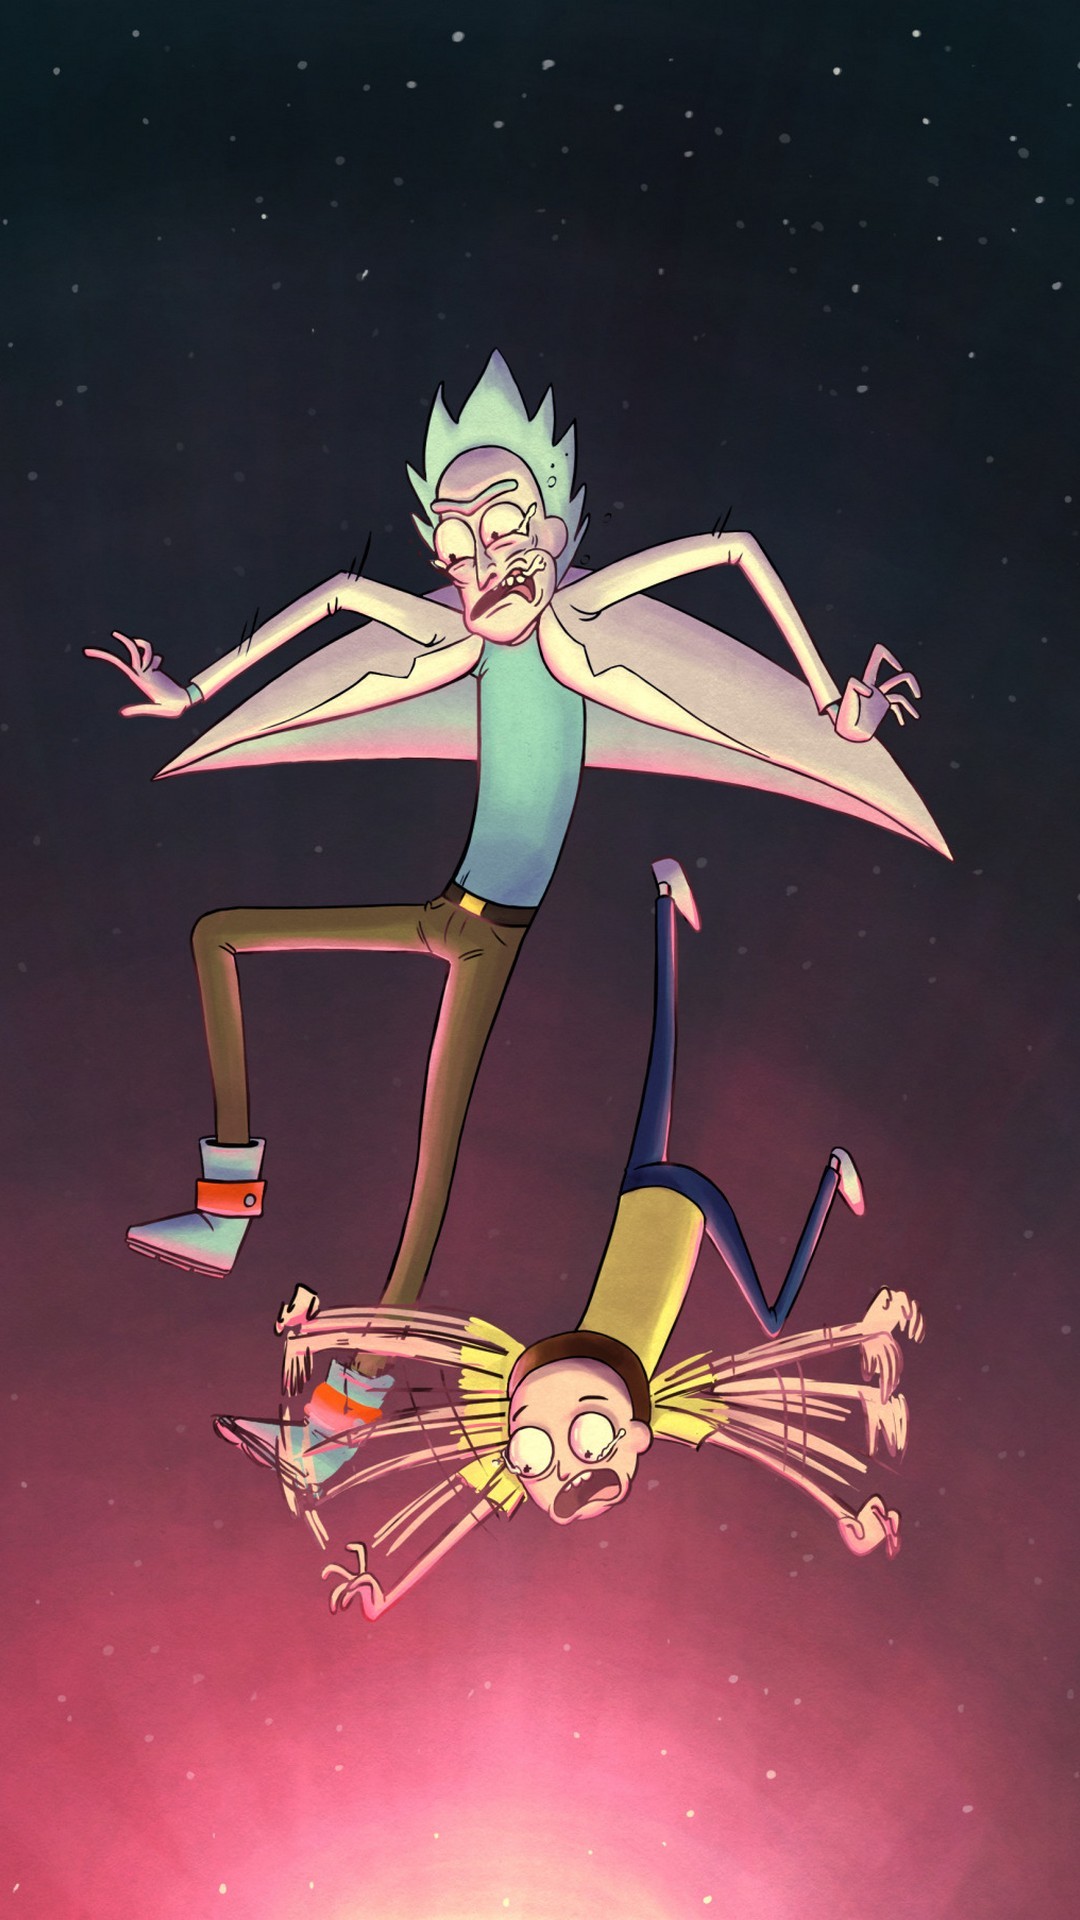 Rick and Morty HD Wallpaper For iPhone with resolution 1080X1920 pixel. You can use this wallpaper as background for your desktop Computer Screensavers, Android or iPhone smartphones